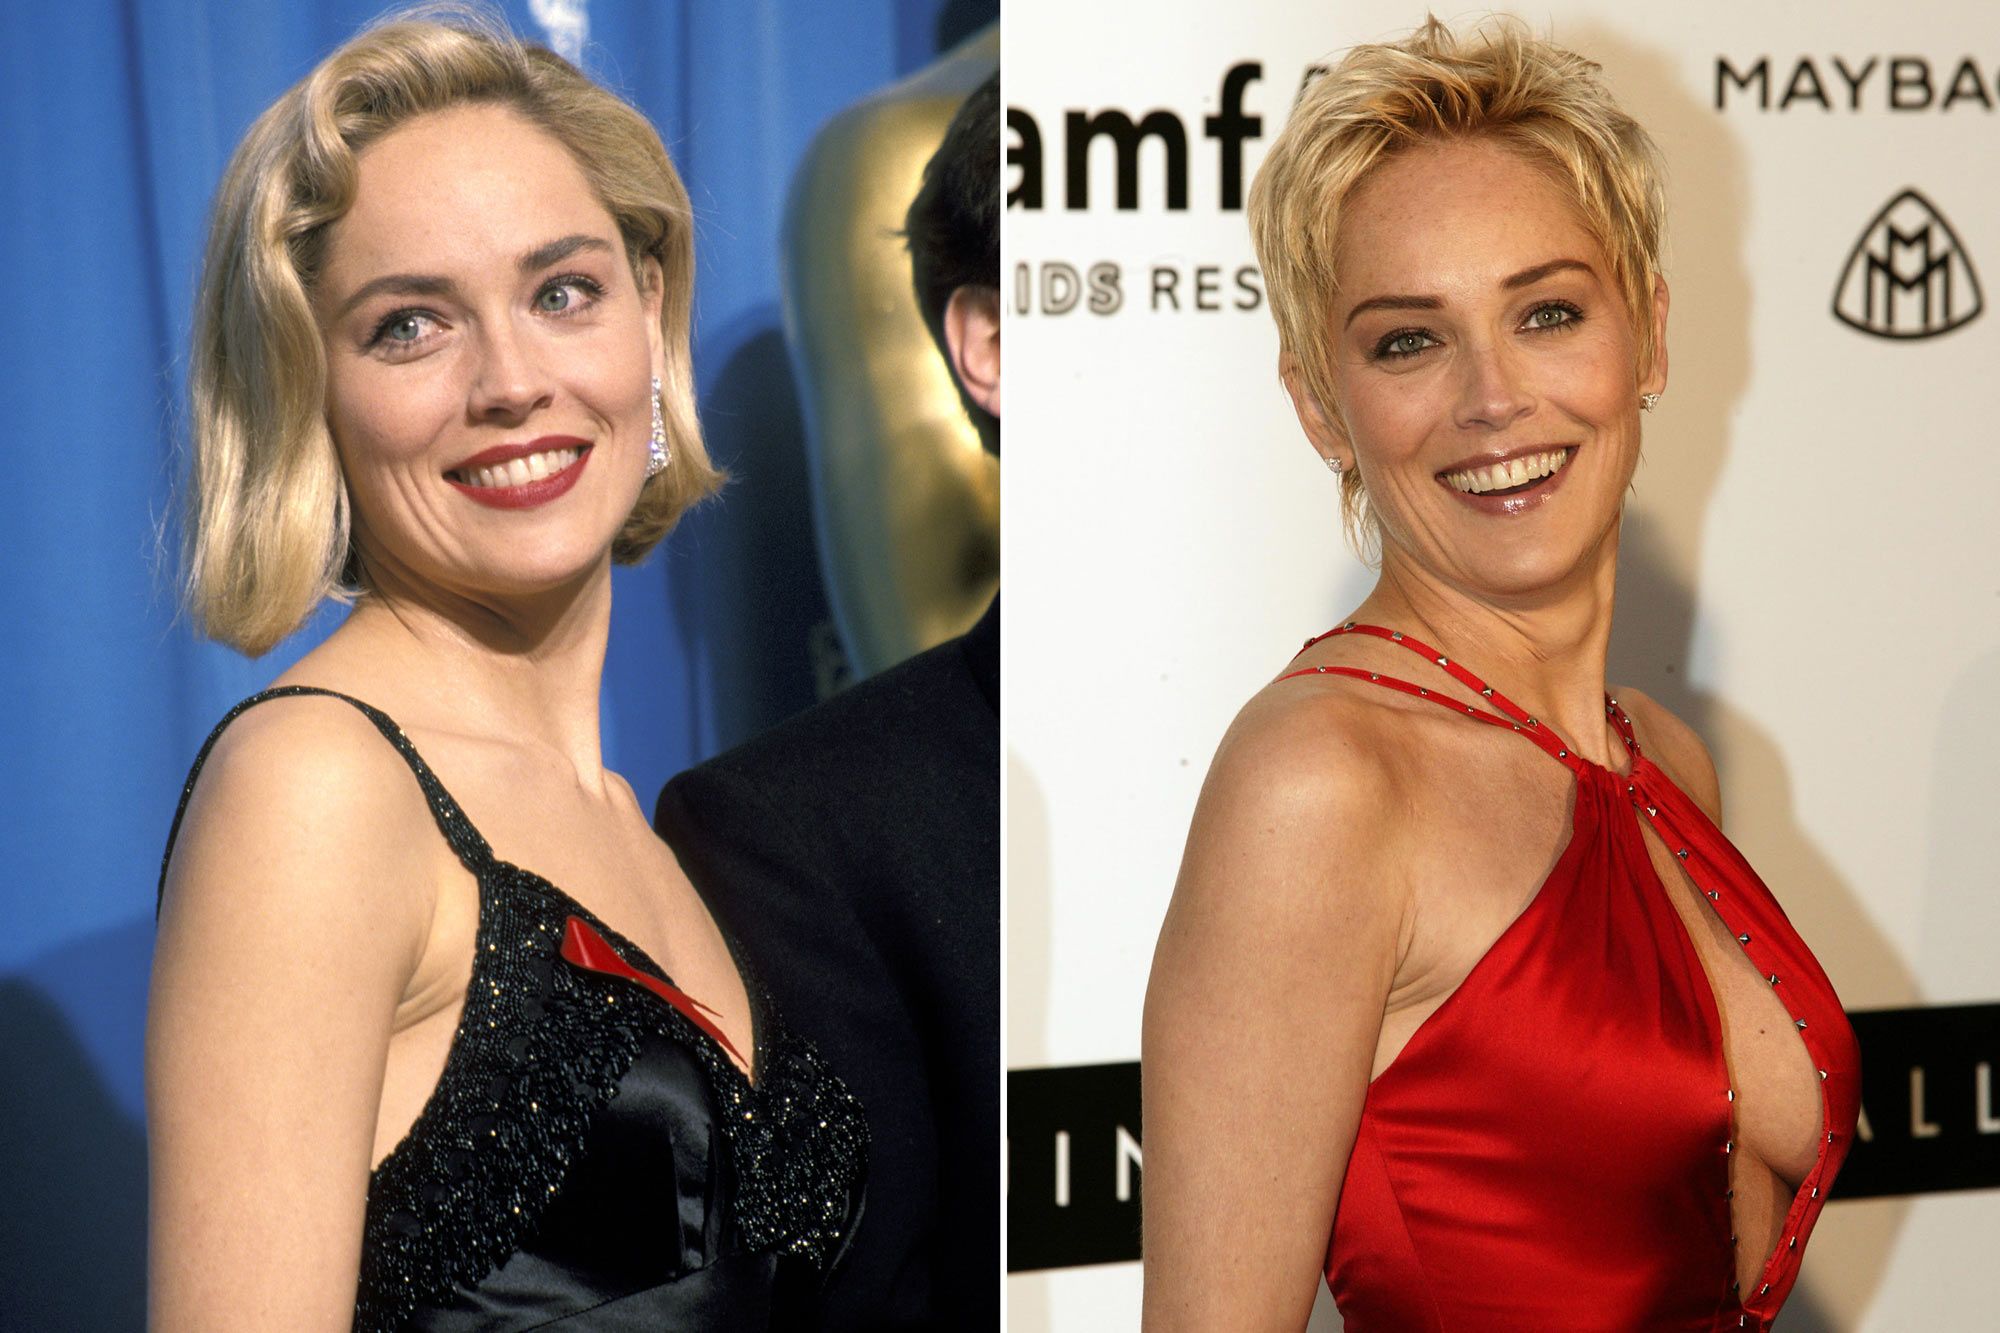 Sharon Stone says surgeon gave her larger breasts without consent